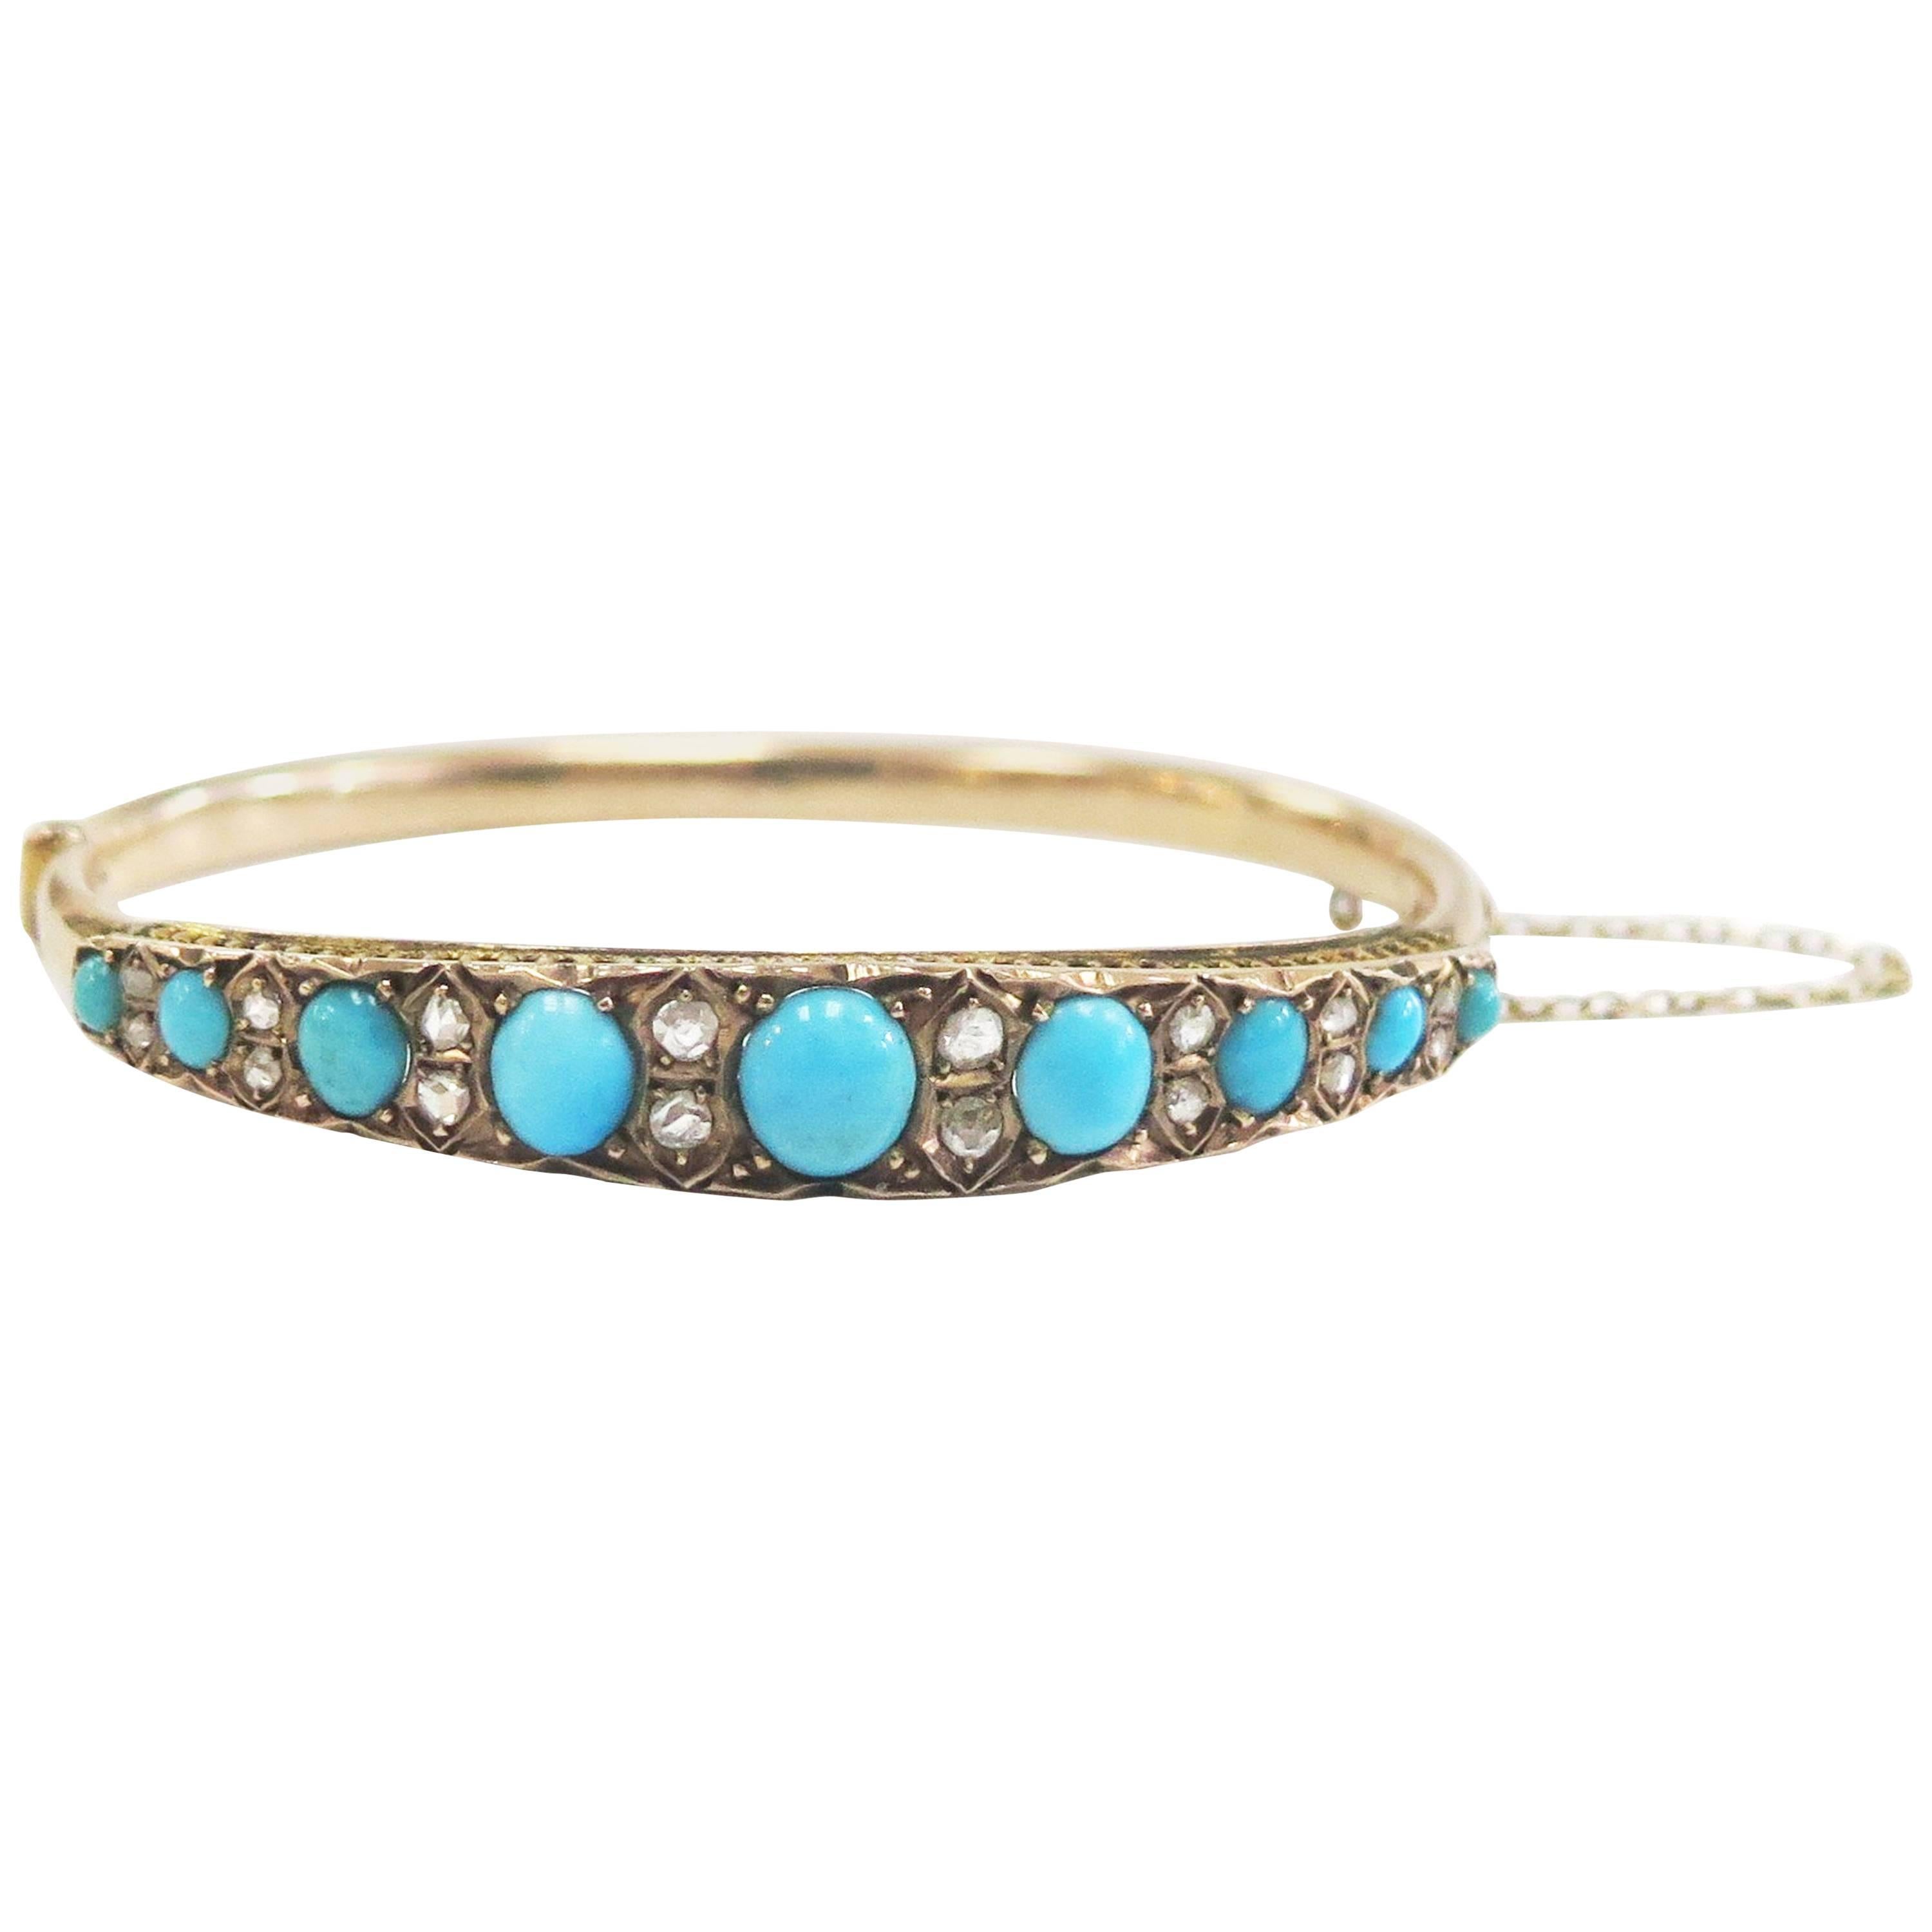 Antique Victorian 1800s Bangle with Turquoise, Rose Cut Diamonds, 14 Karat For Sale